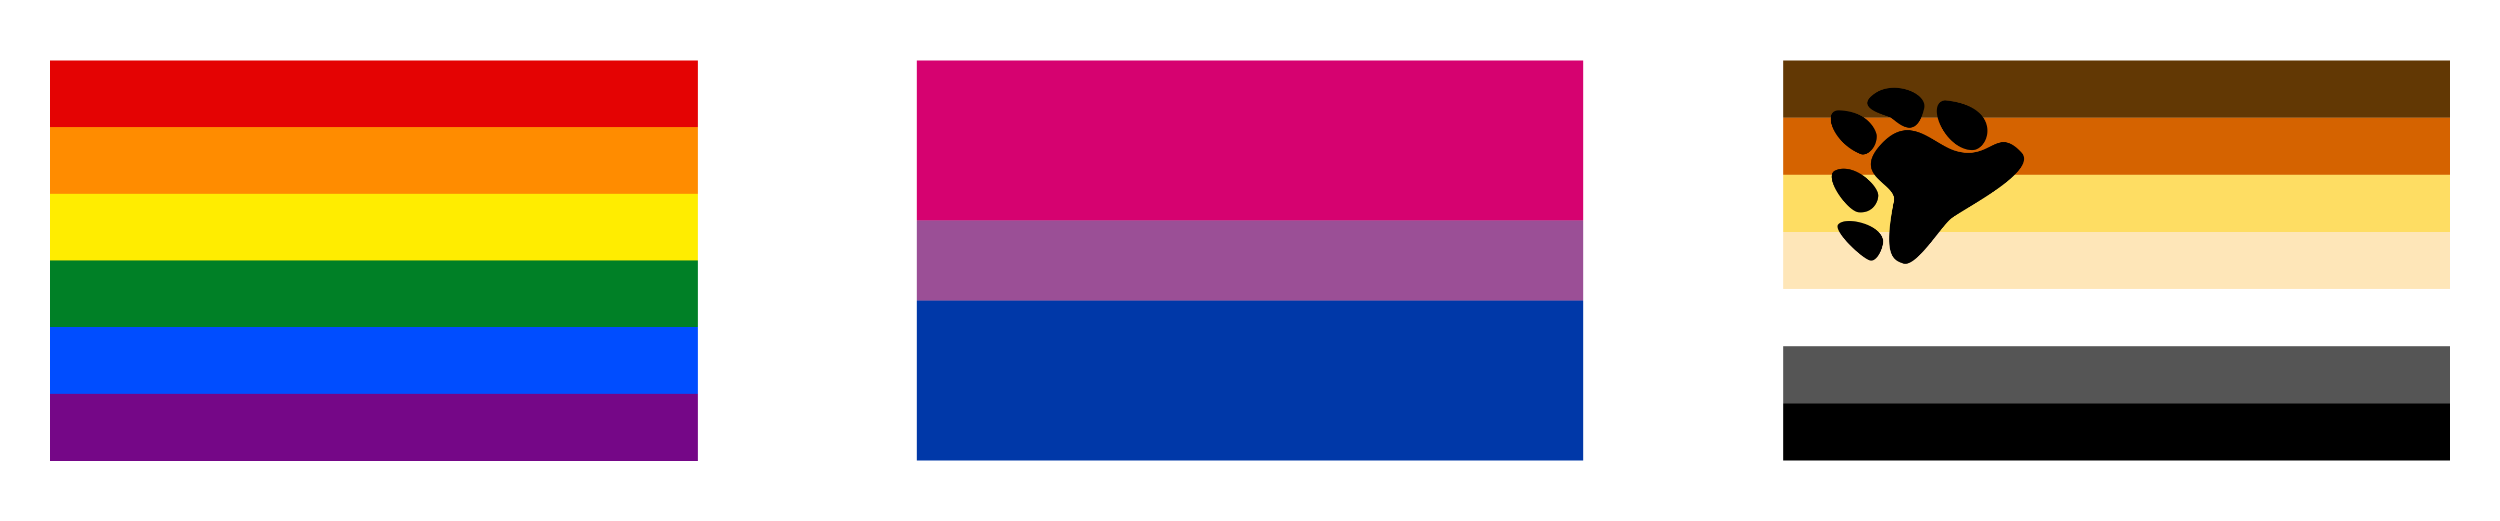 flags for the LGBT, bisexual, and bear communities